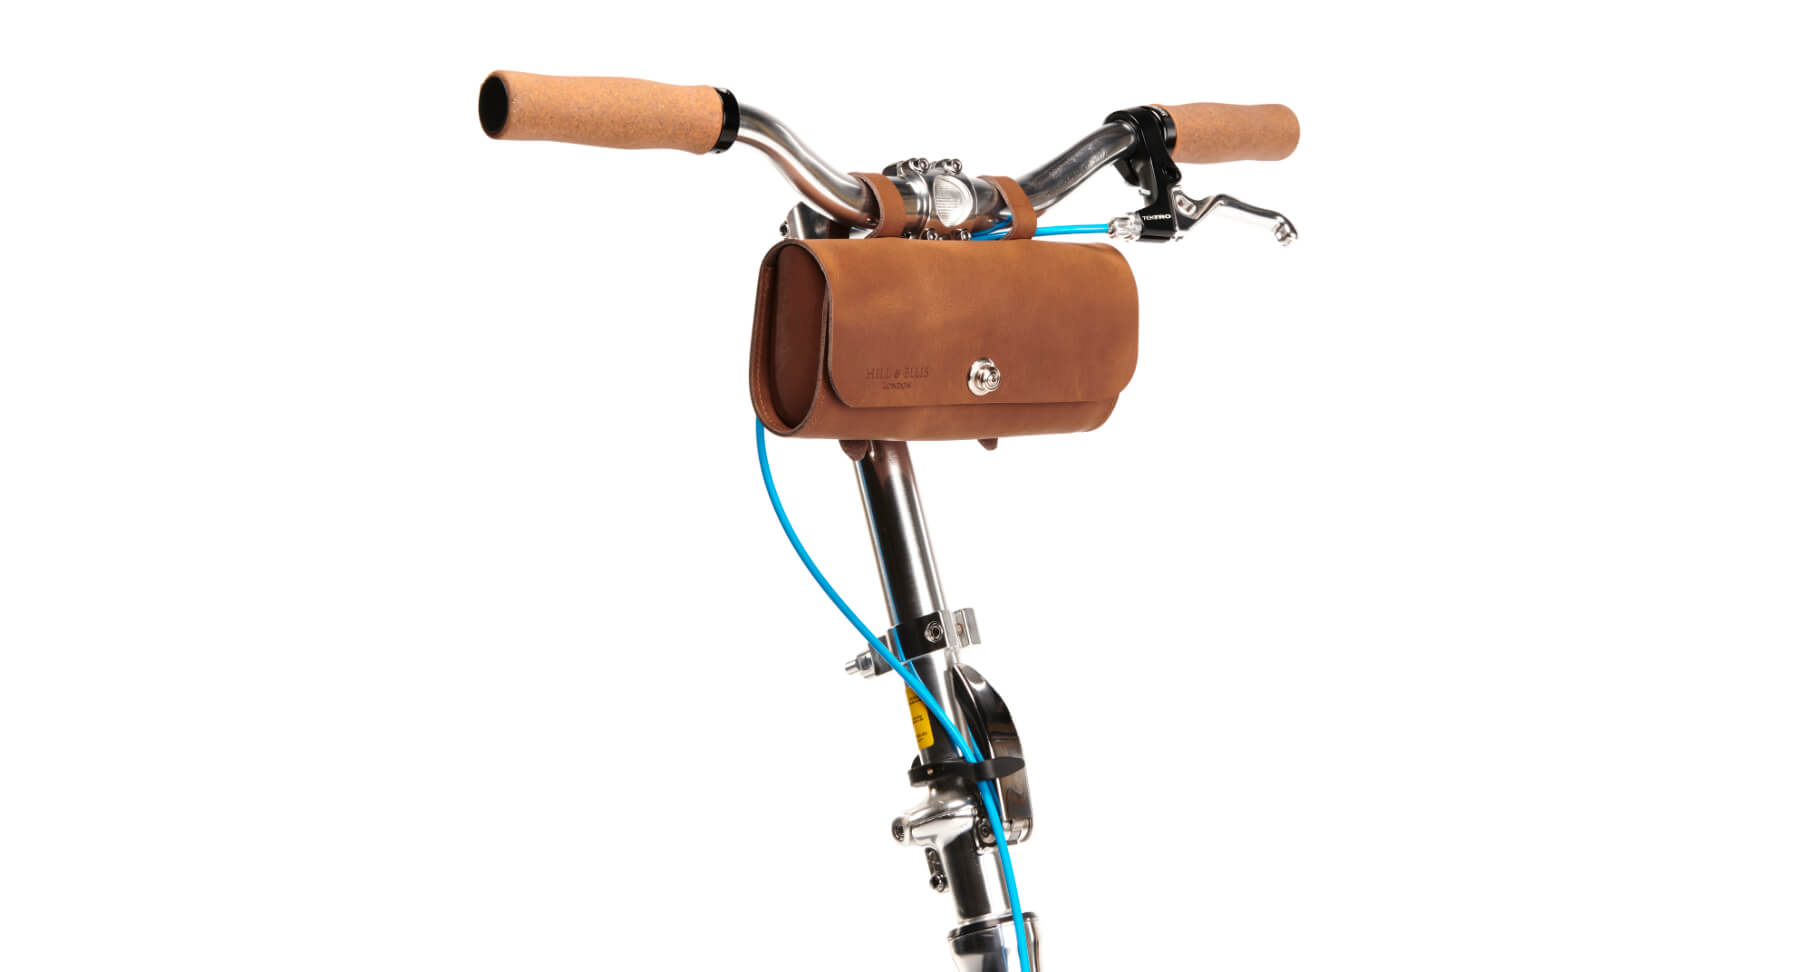 scooter bags, scooter pannier, leather handlebar bag